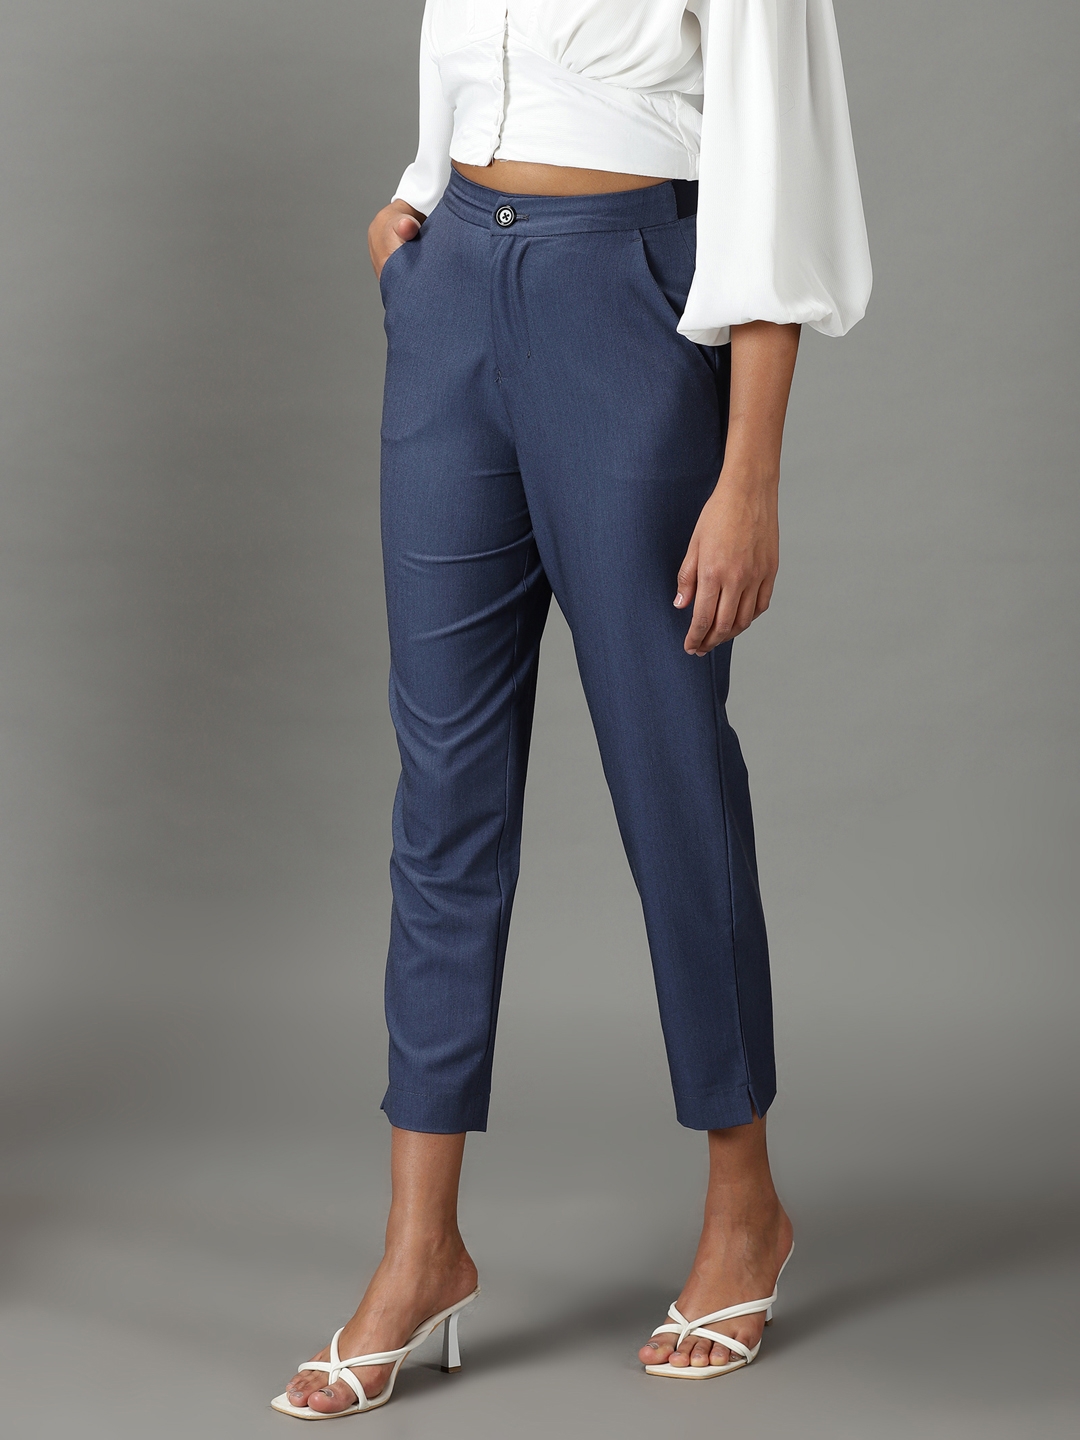 Source Formal pants women ladies office formal trousers suit on  malibabacom